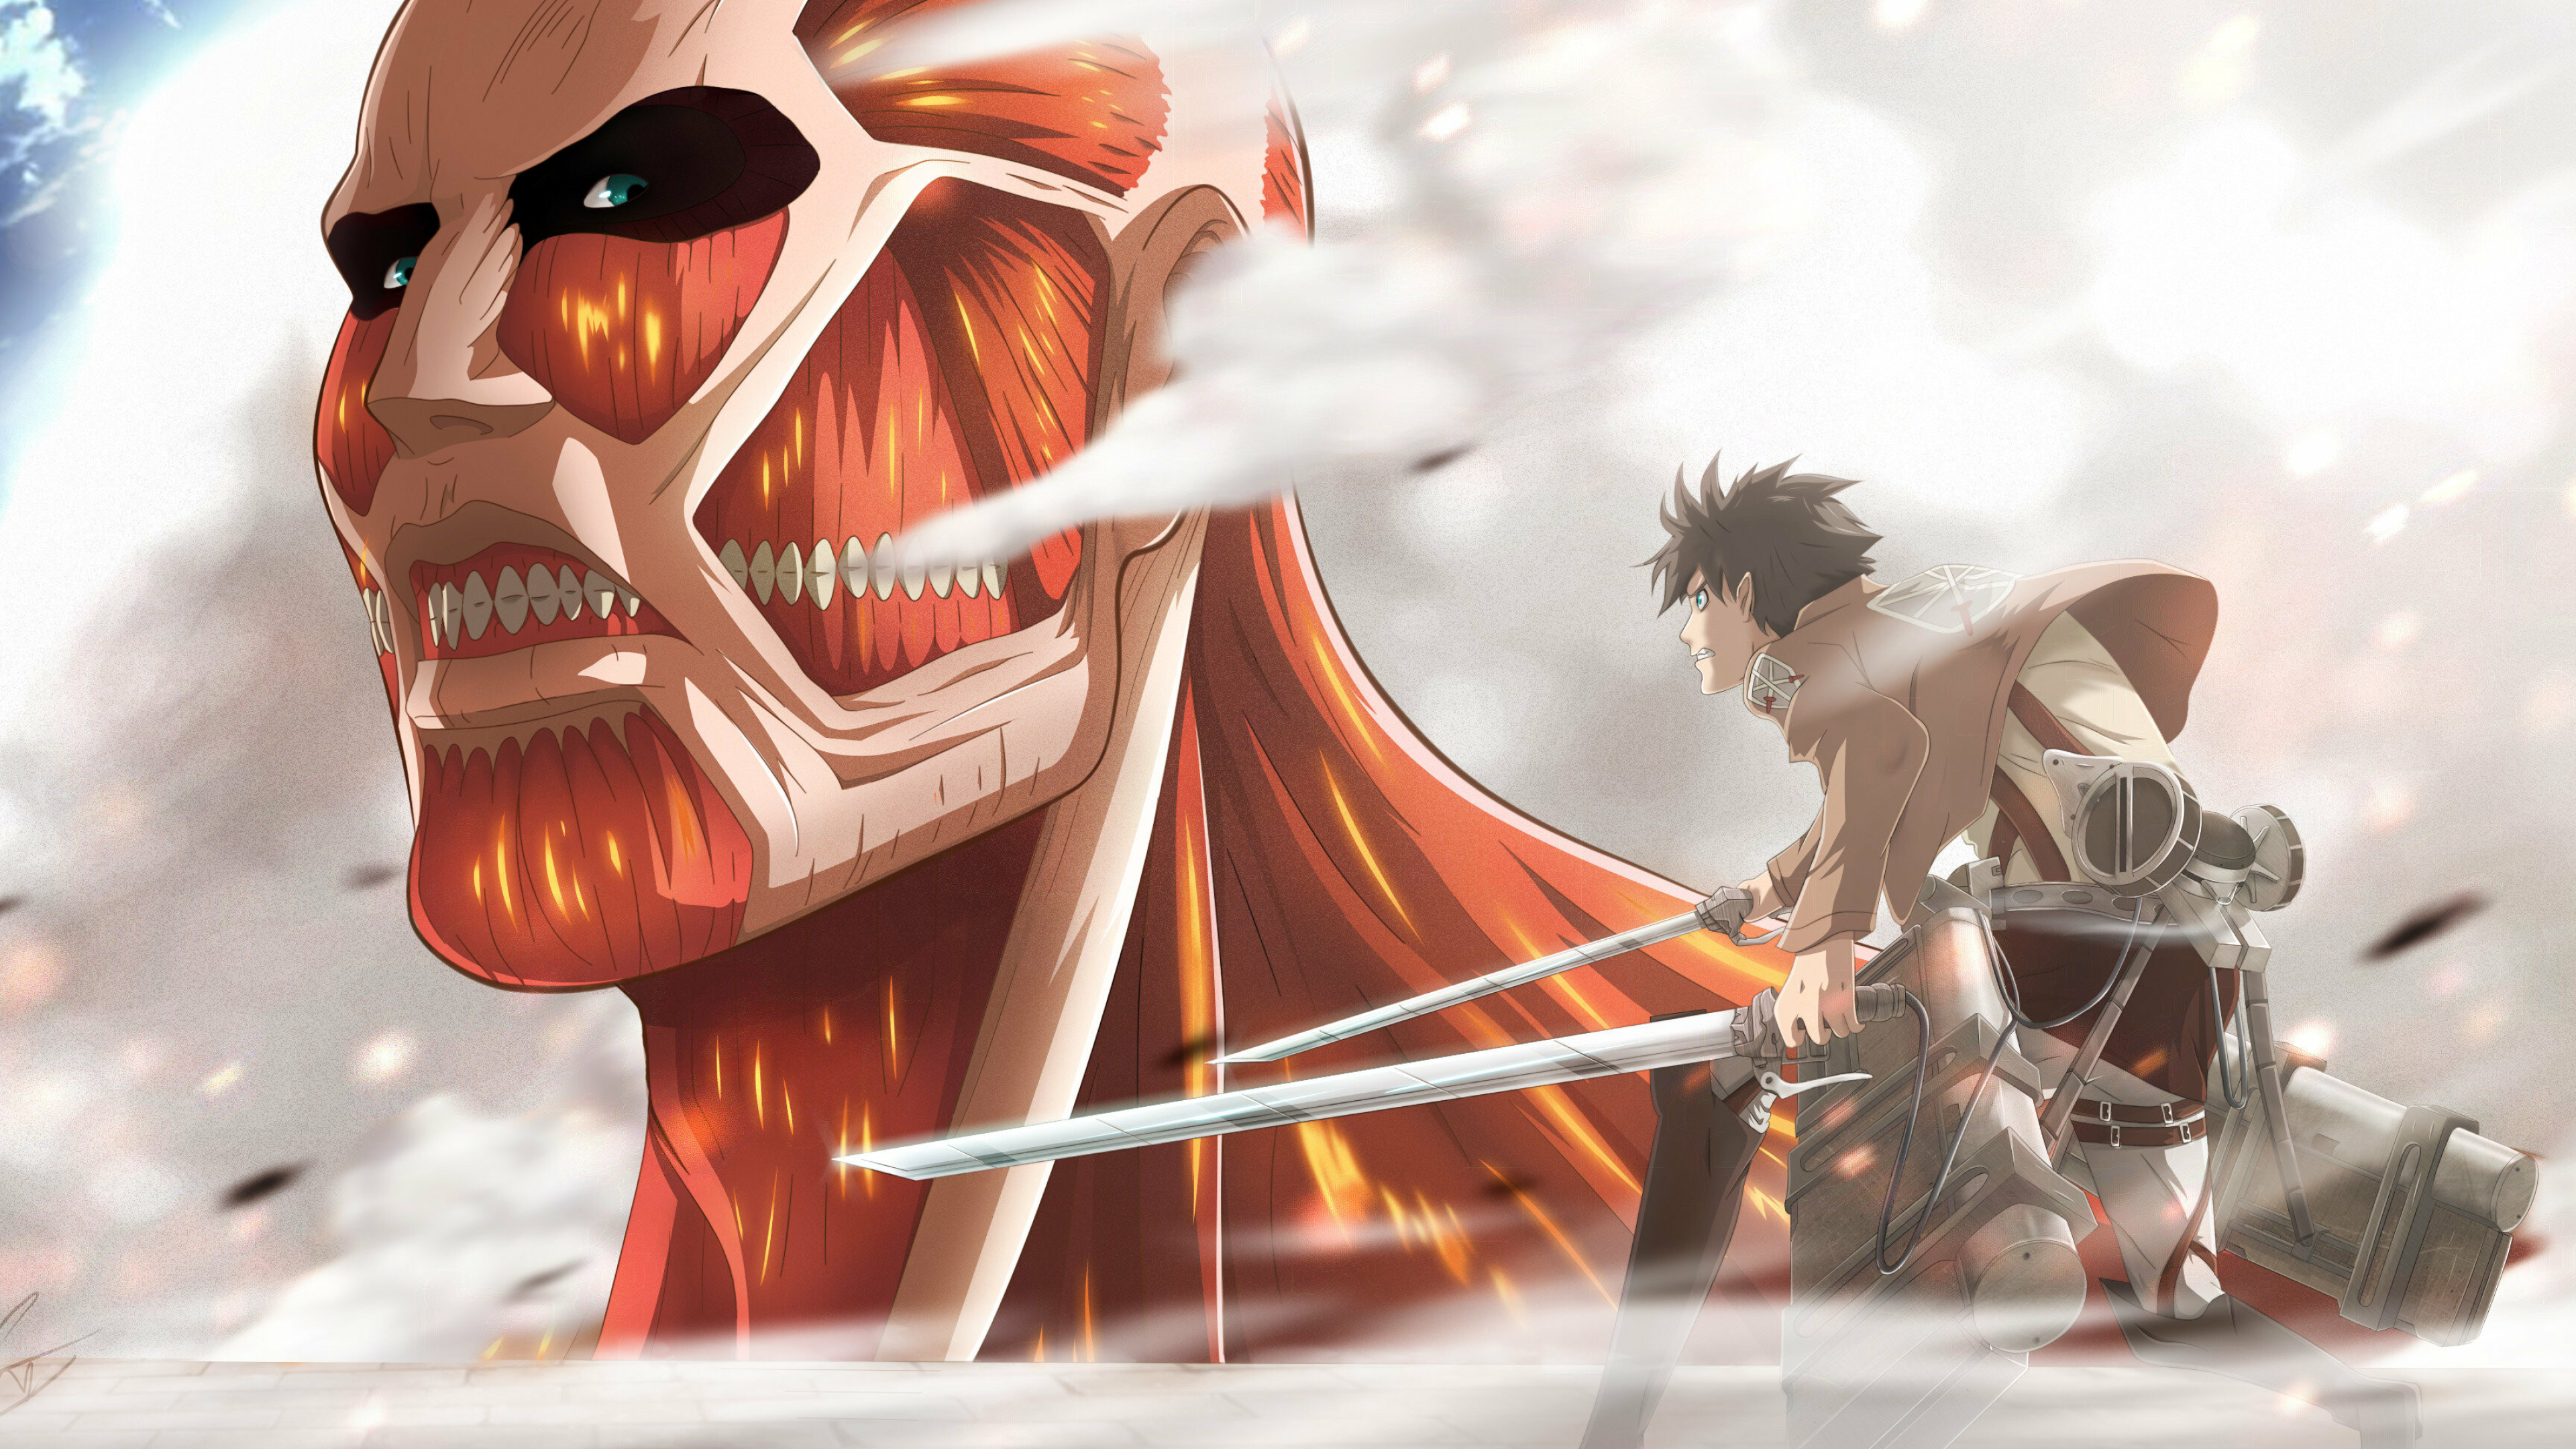 Attack on Titan (TV Series): Eren Yeager, A fictional character and the protagonist of the manga. 3840x2160 4K Wallpaper.